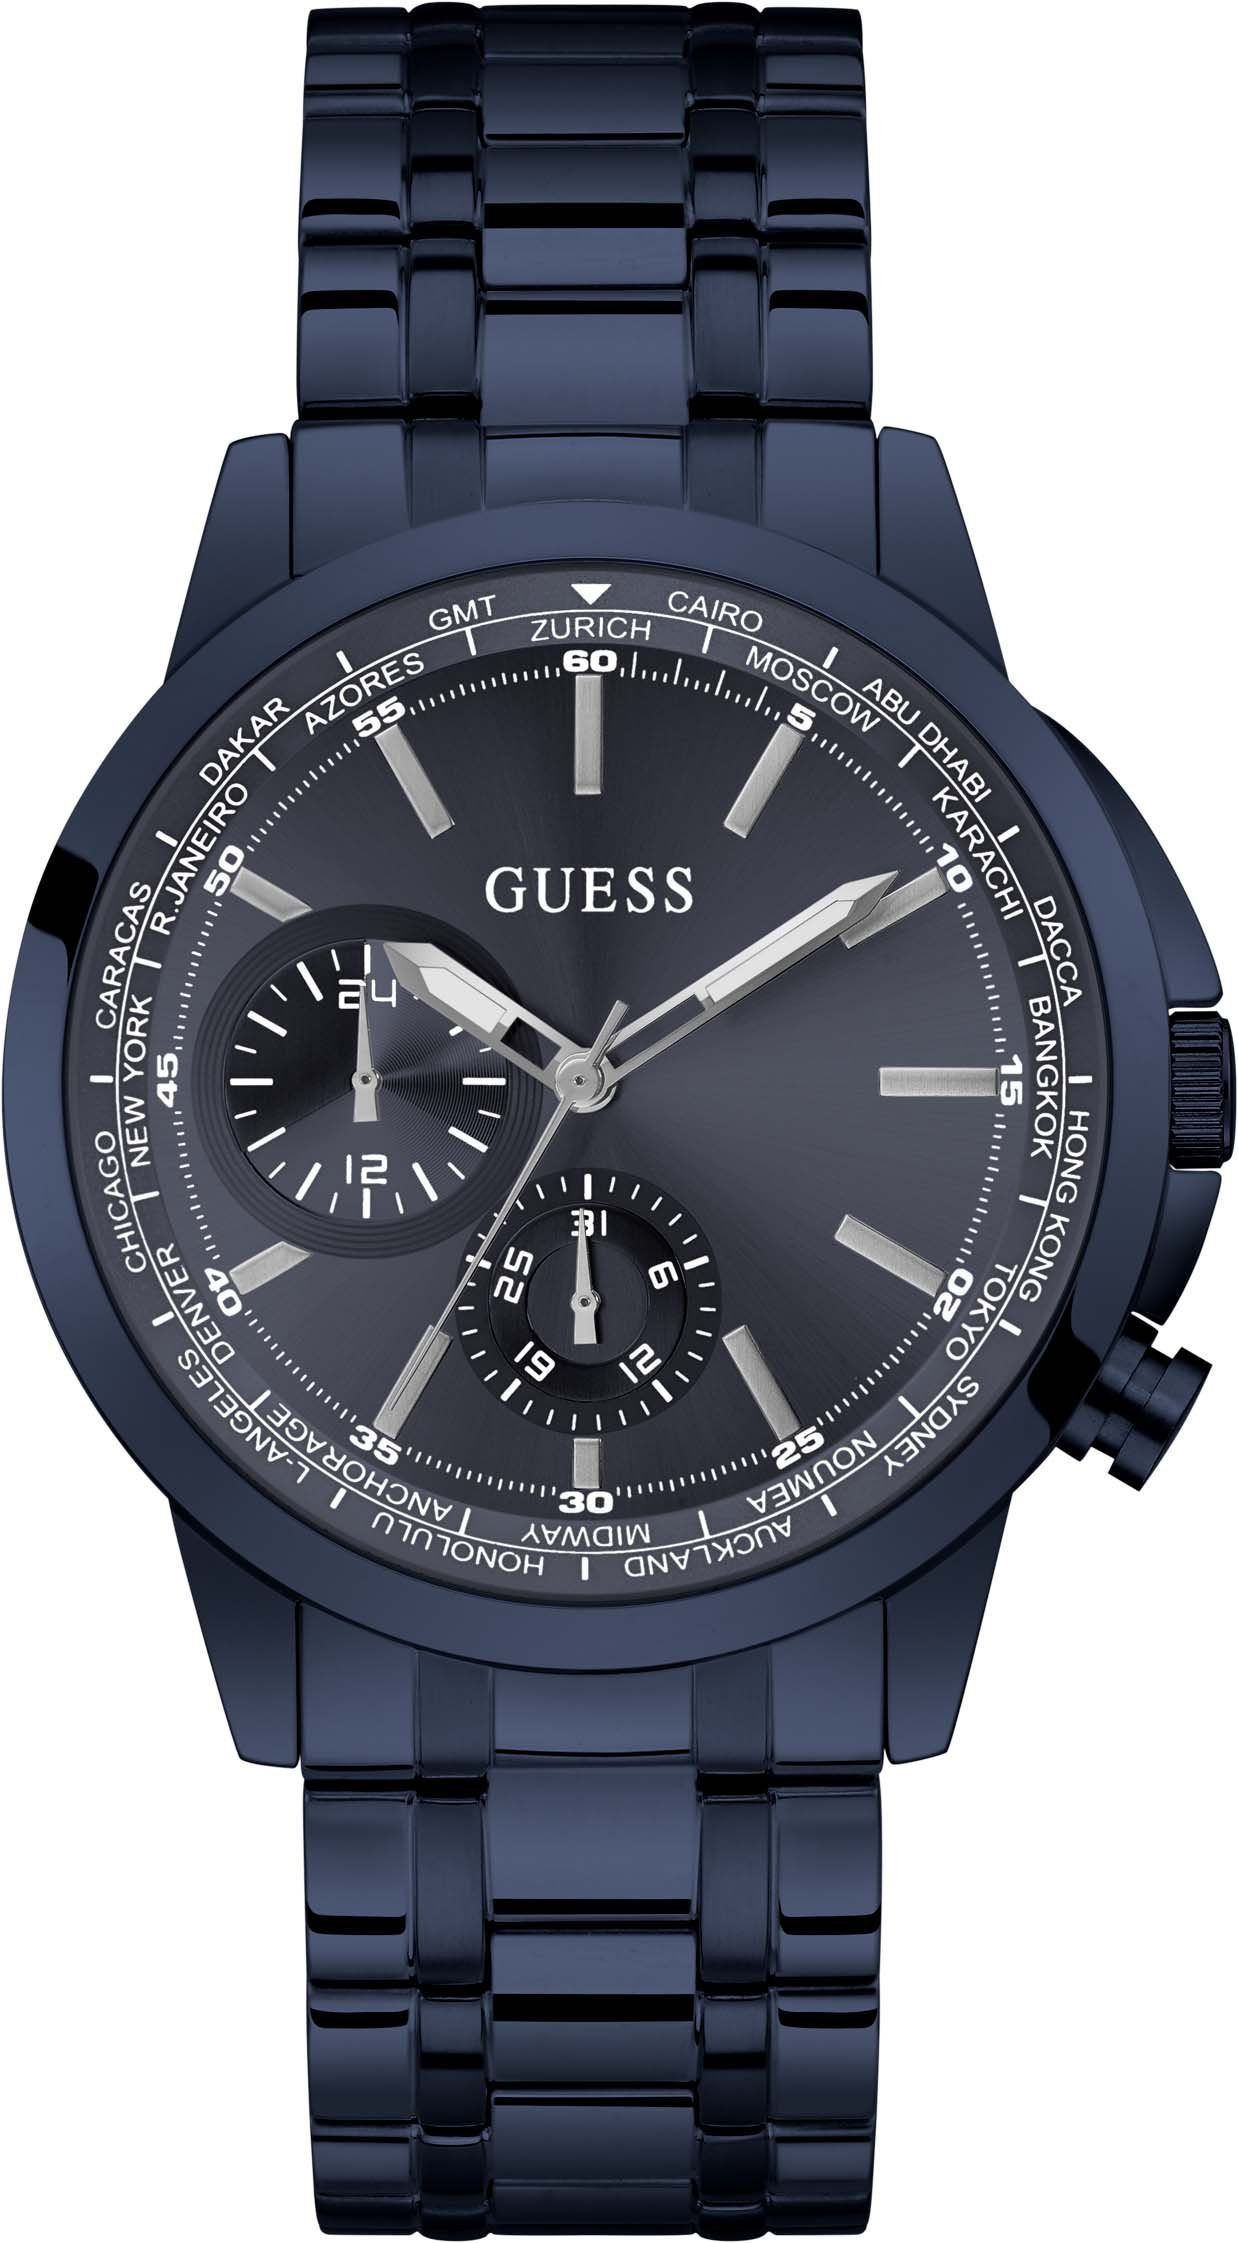 Guess Multifunktionsuhr GW0490G4